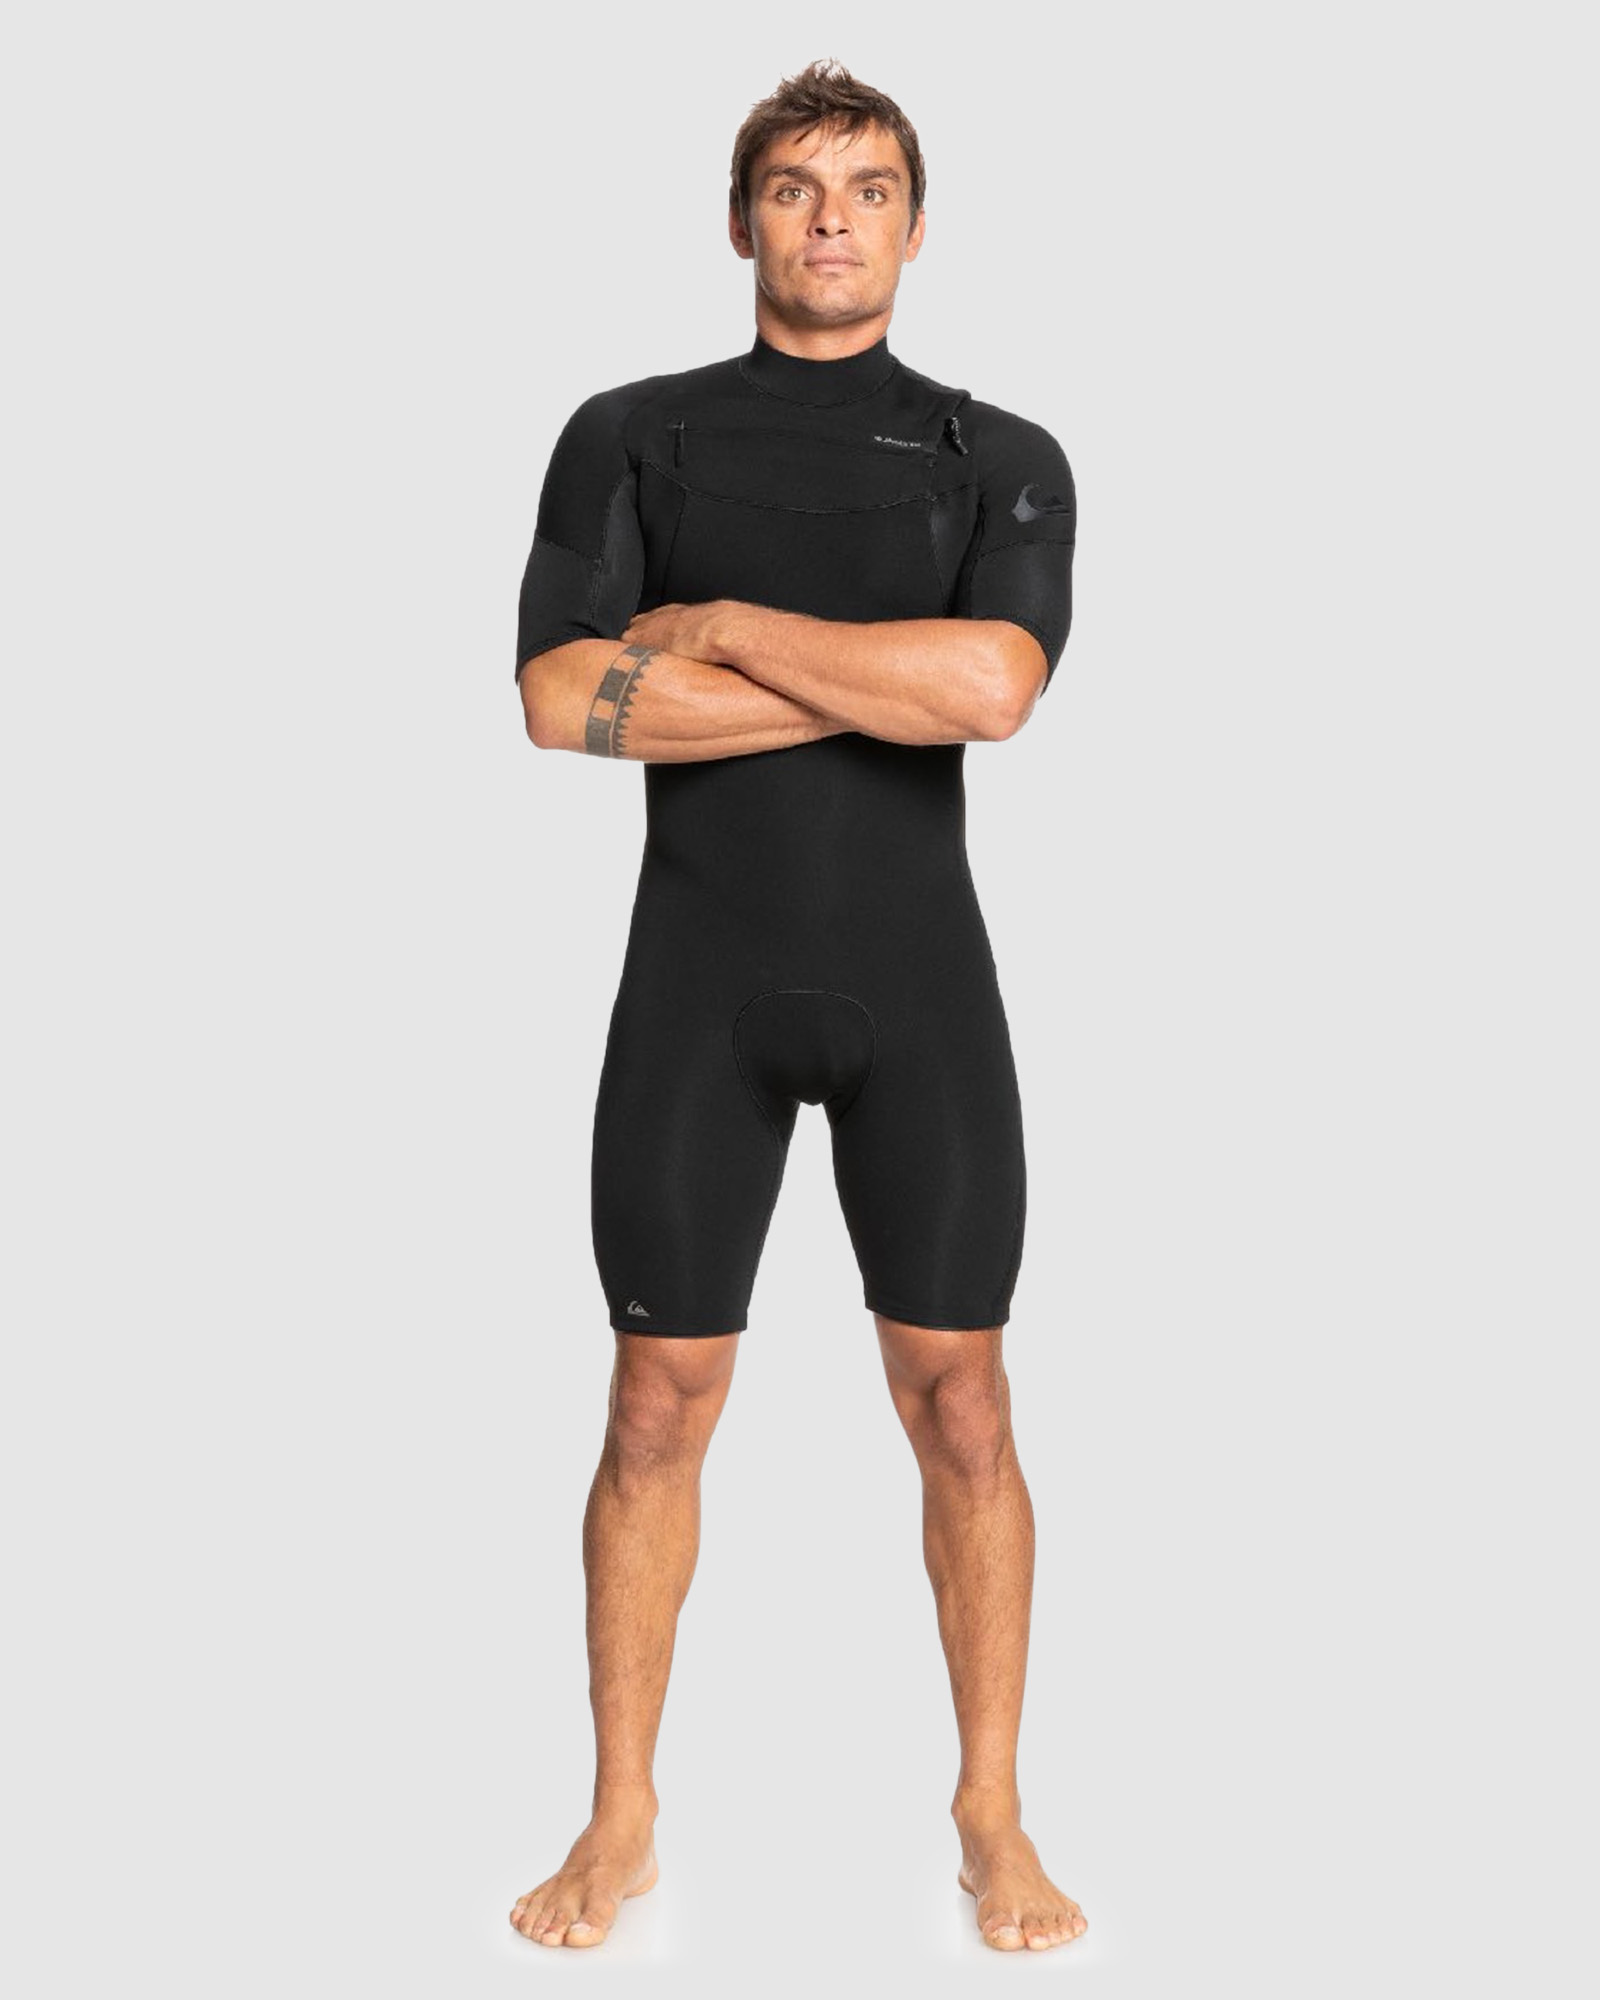 Quiksilver Everyday Sessions 2/2 Ss Sp Cz Wetsuit - Black | SurfStitch